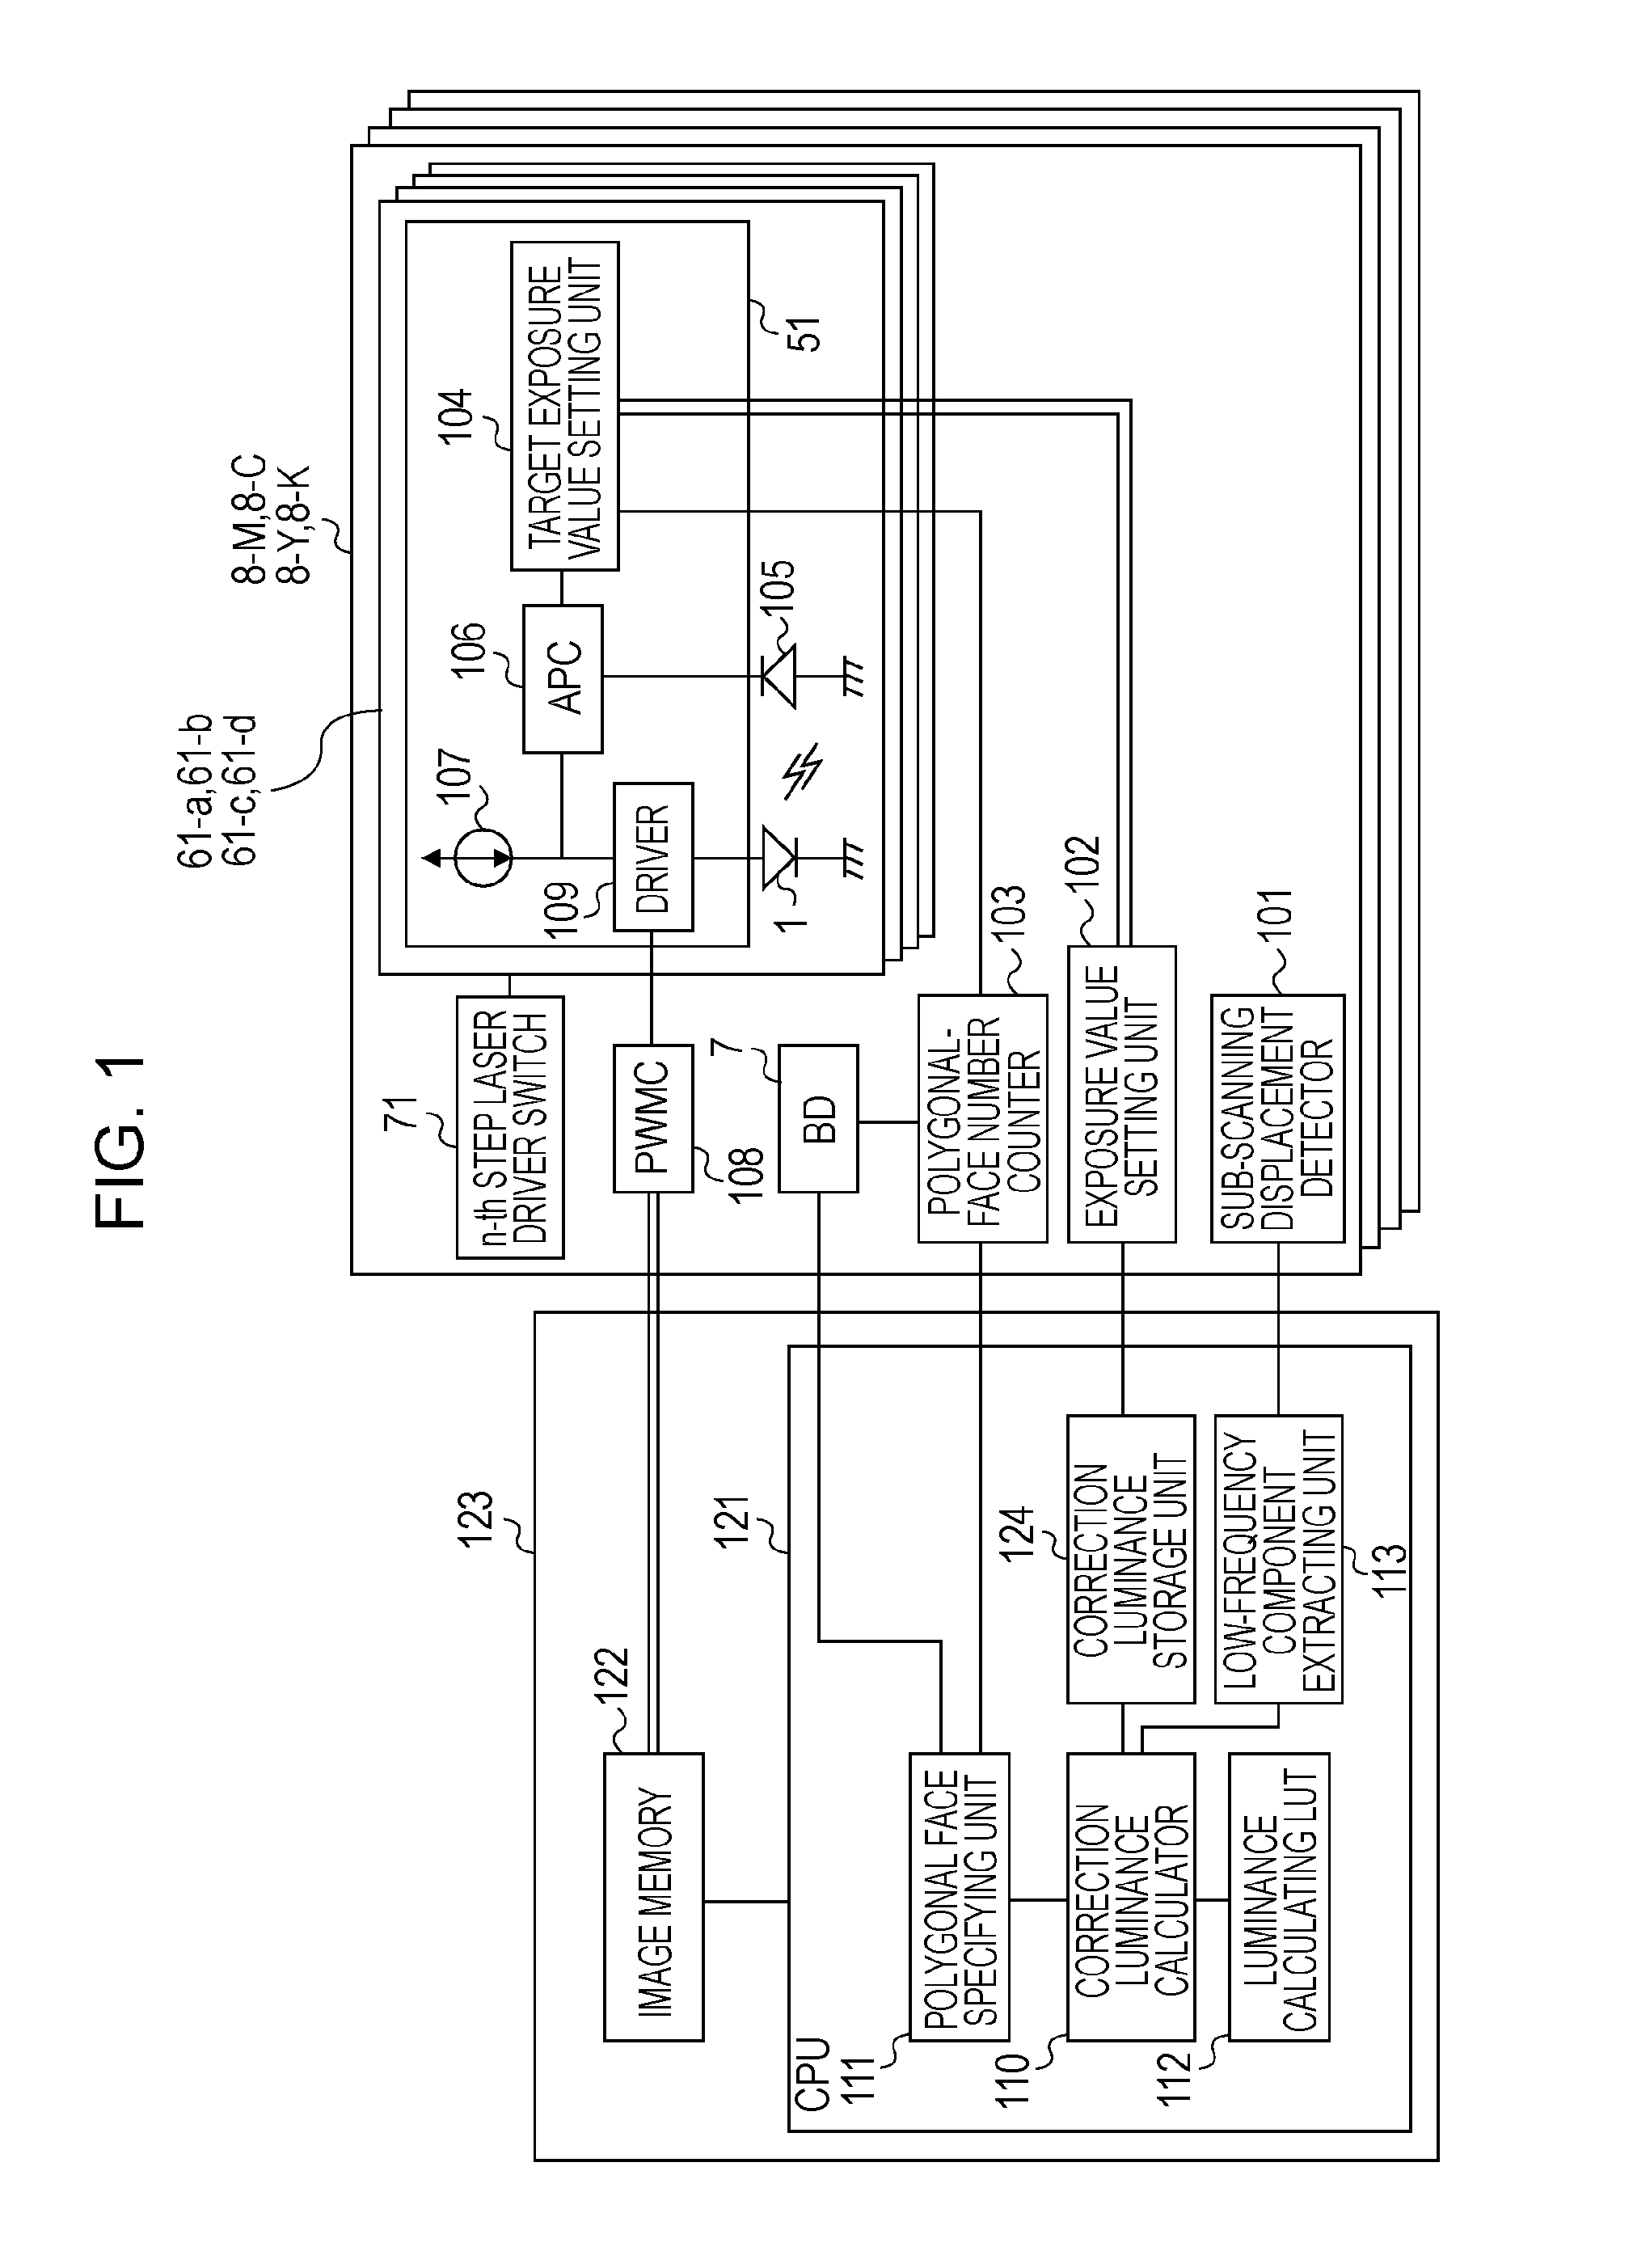 Image forming apparatus and control method